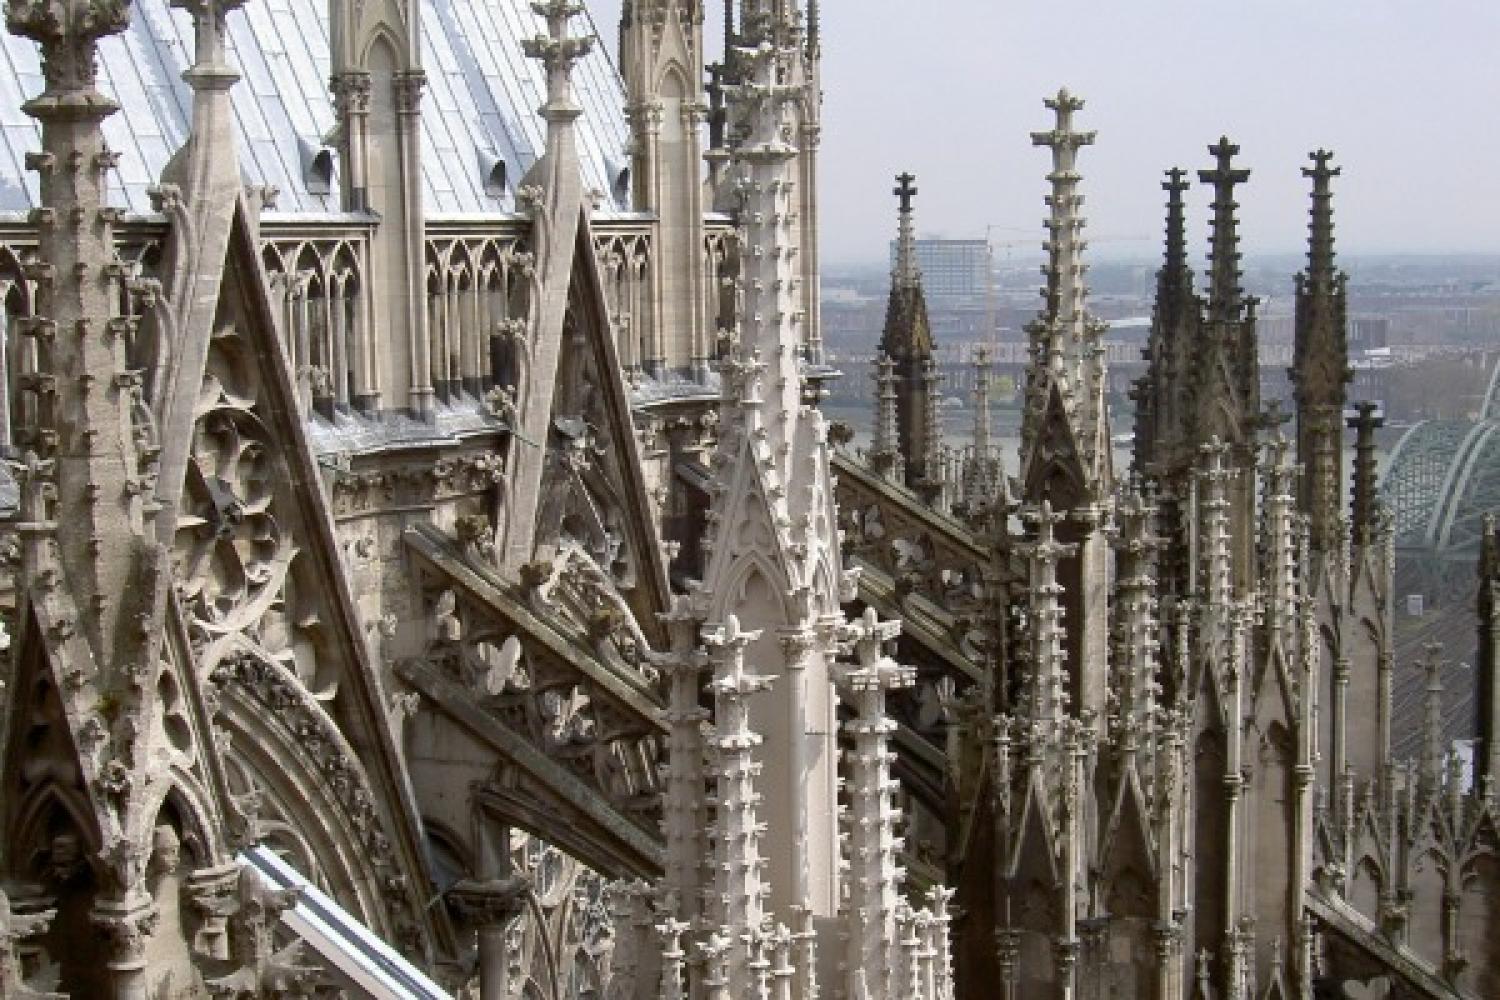 The buttresses and spires of the Cologne Cathedral